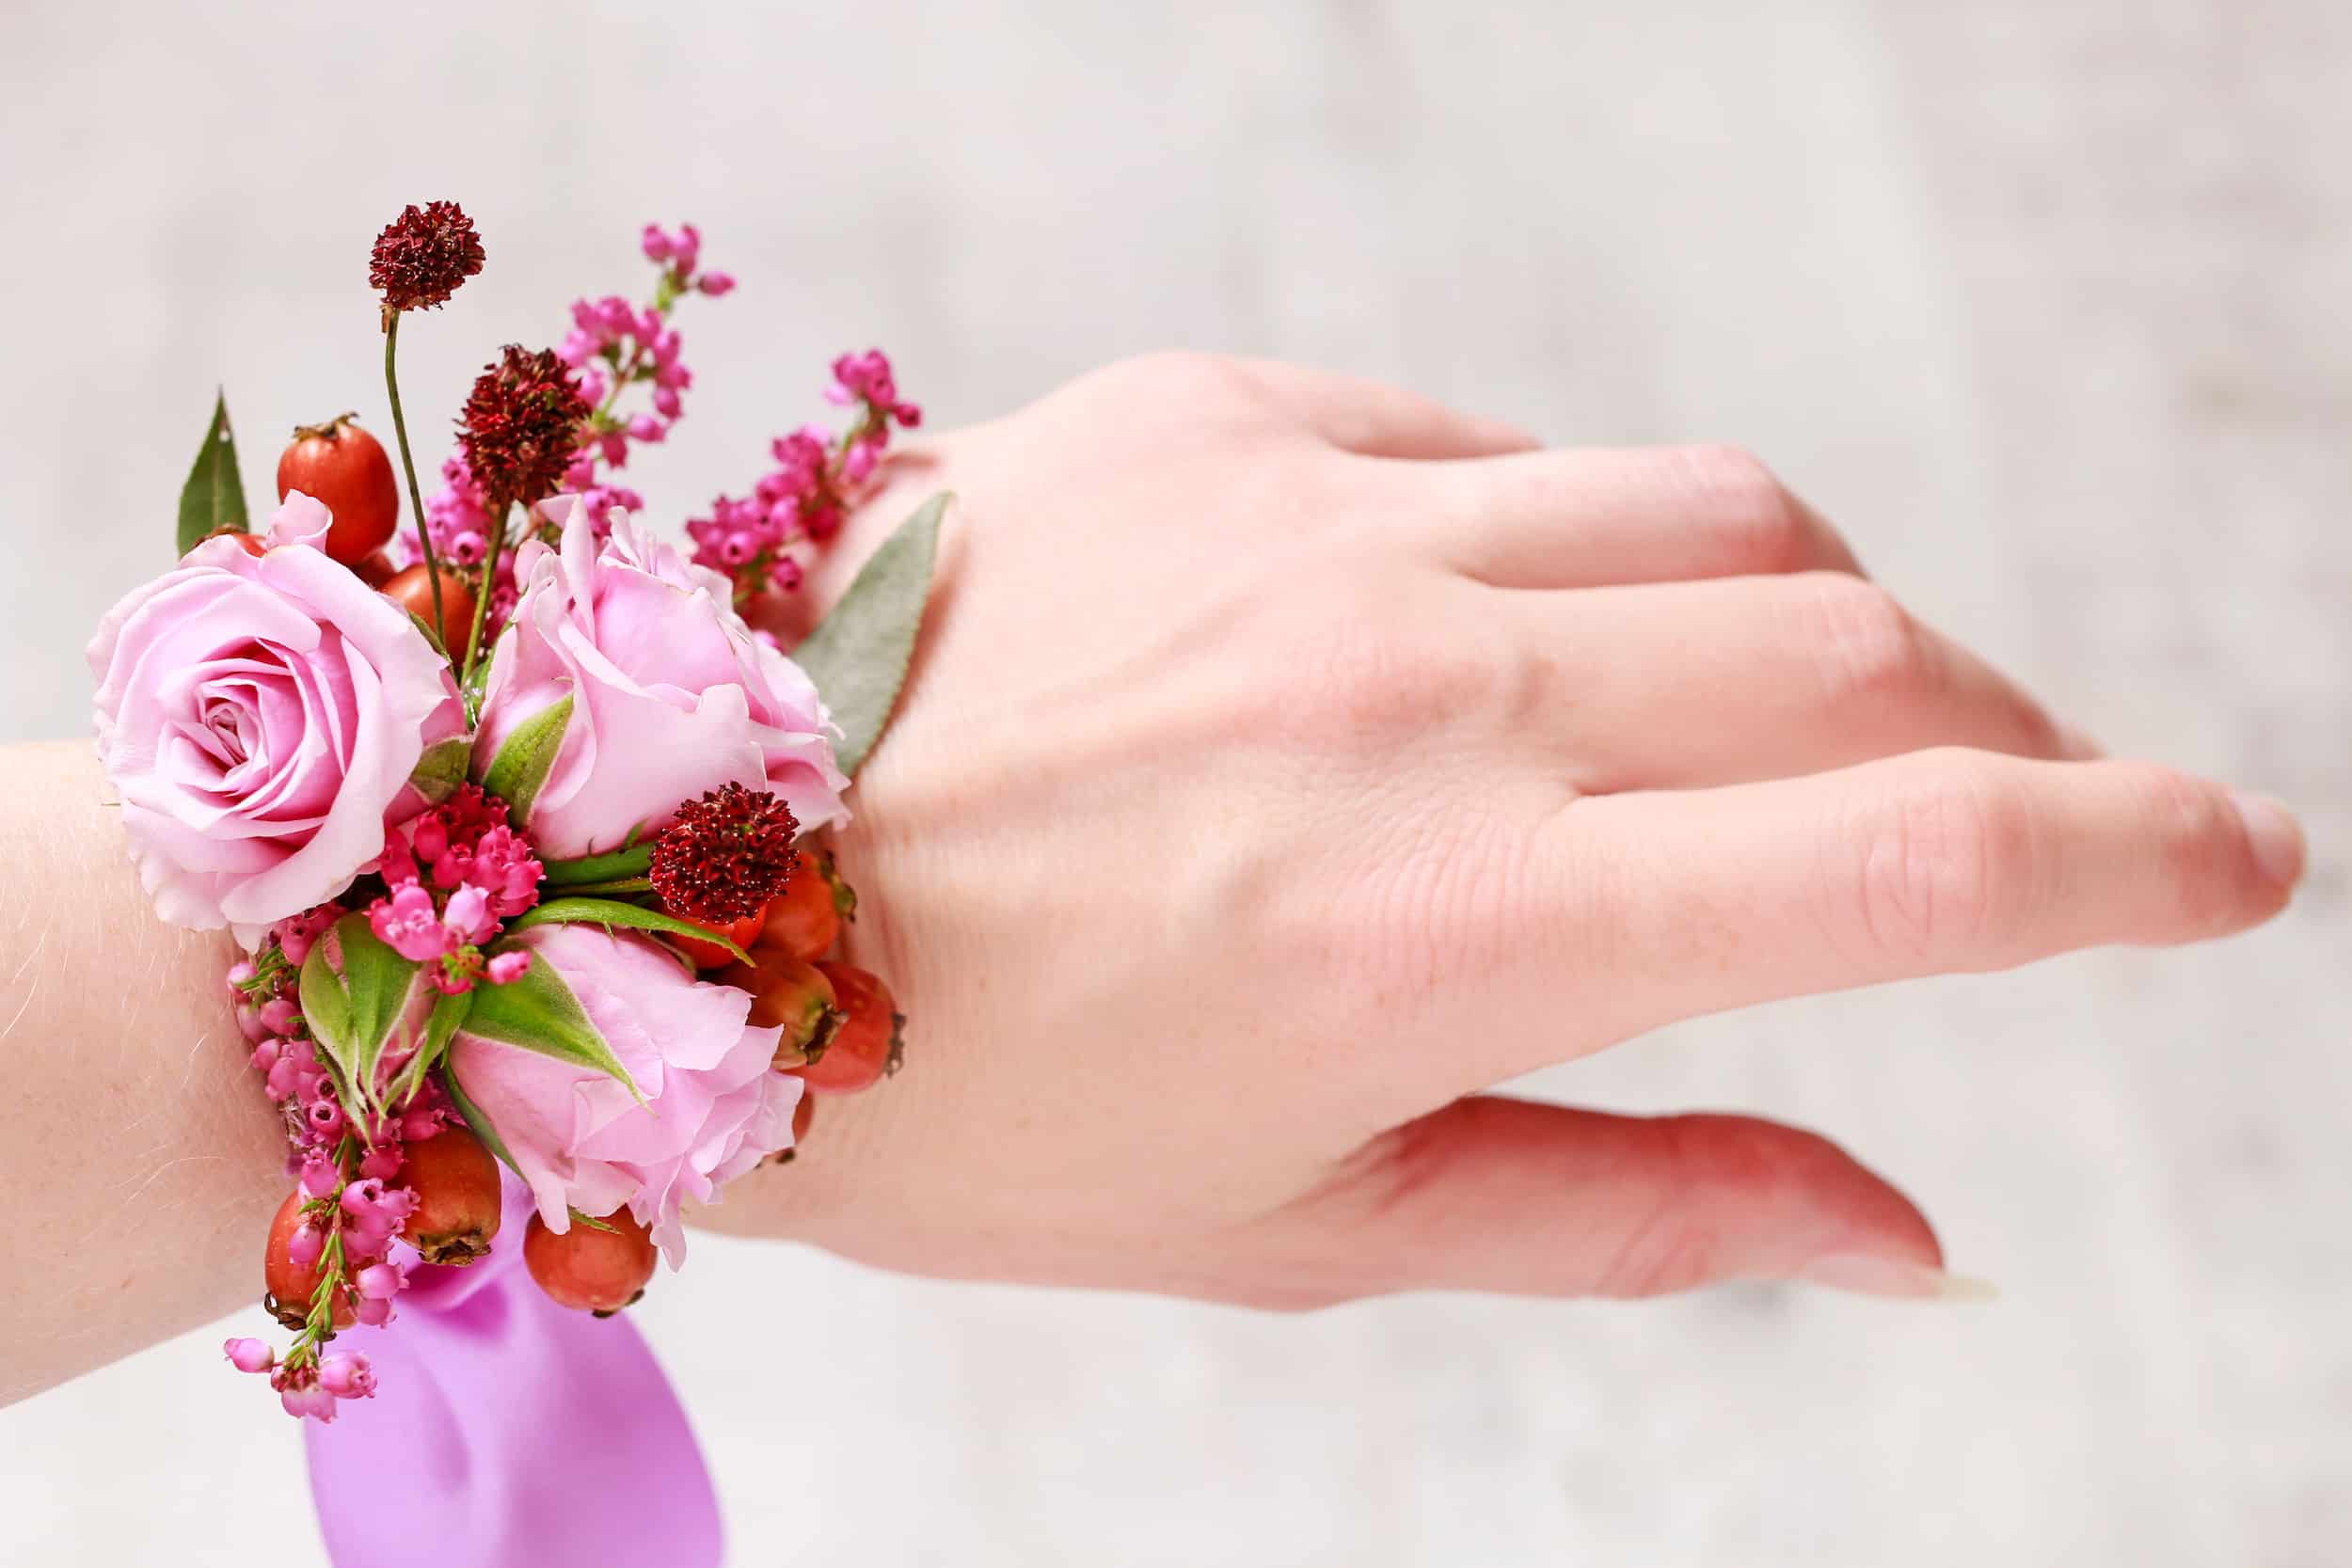 DIY With Flowers: Floral Bracelet : 7 Steps (with Pictures